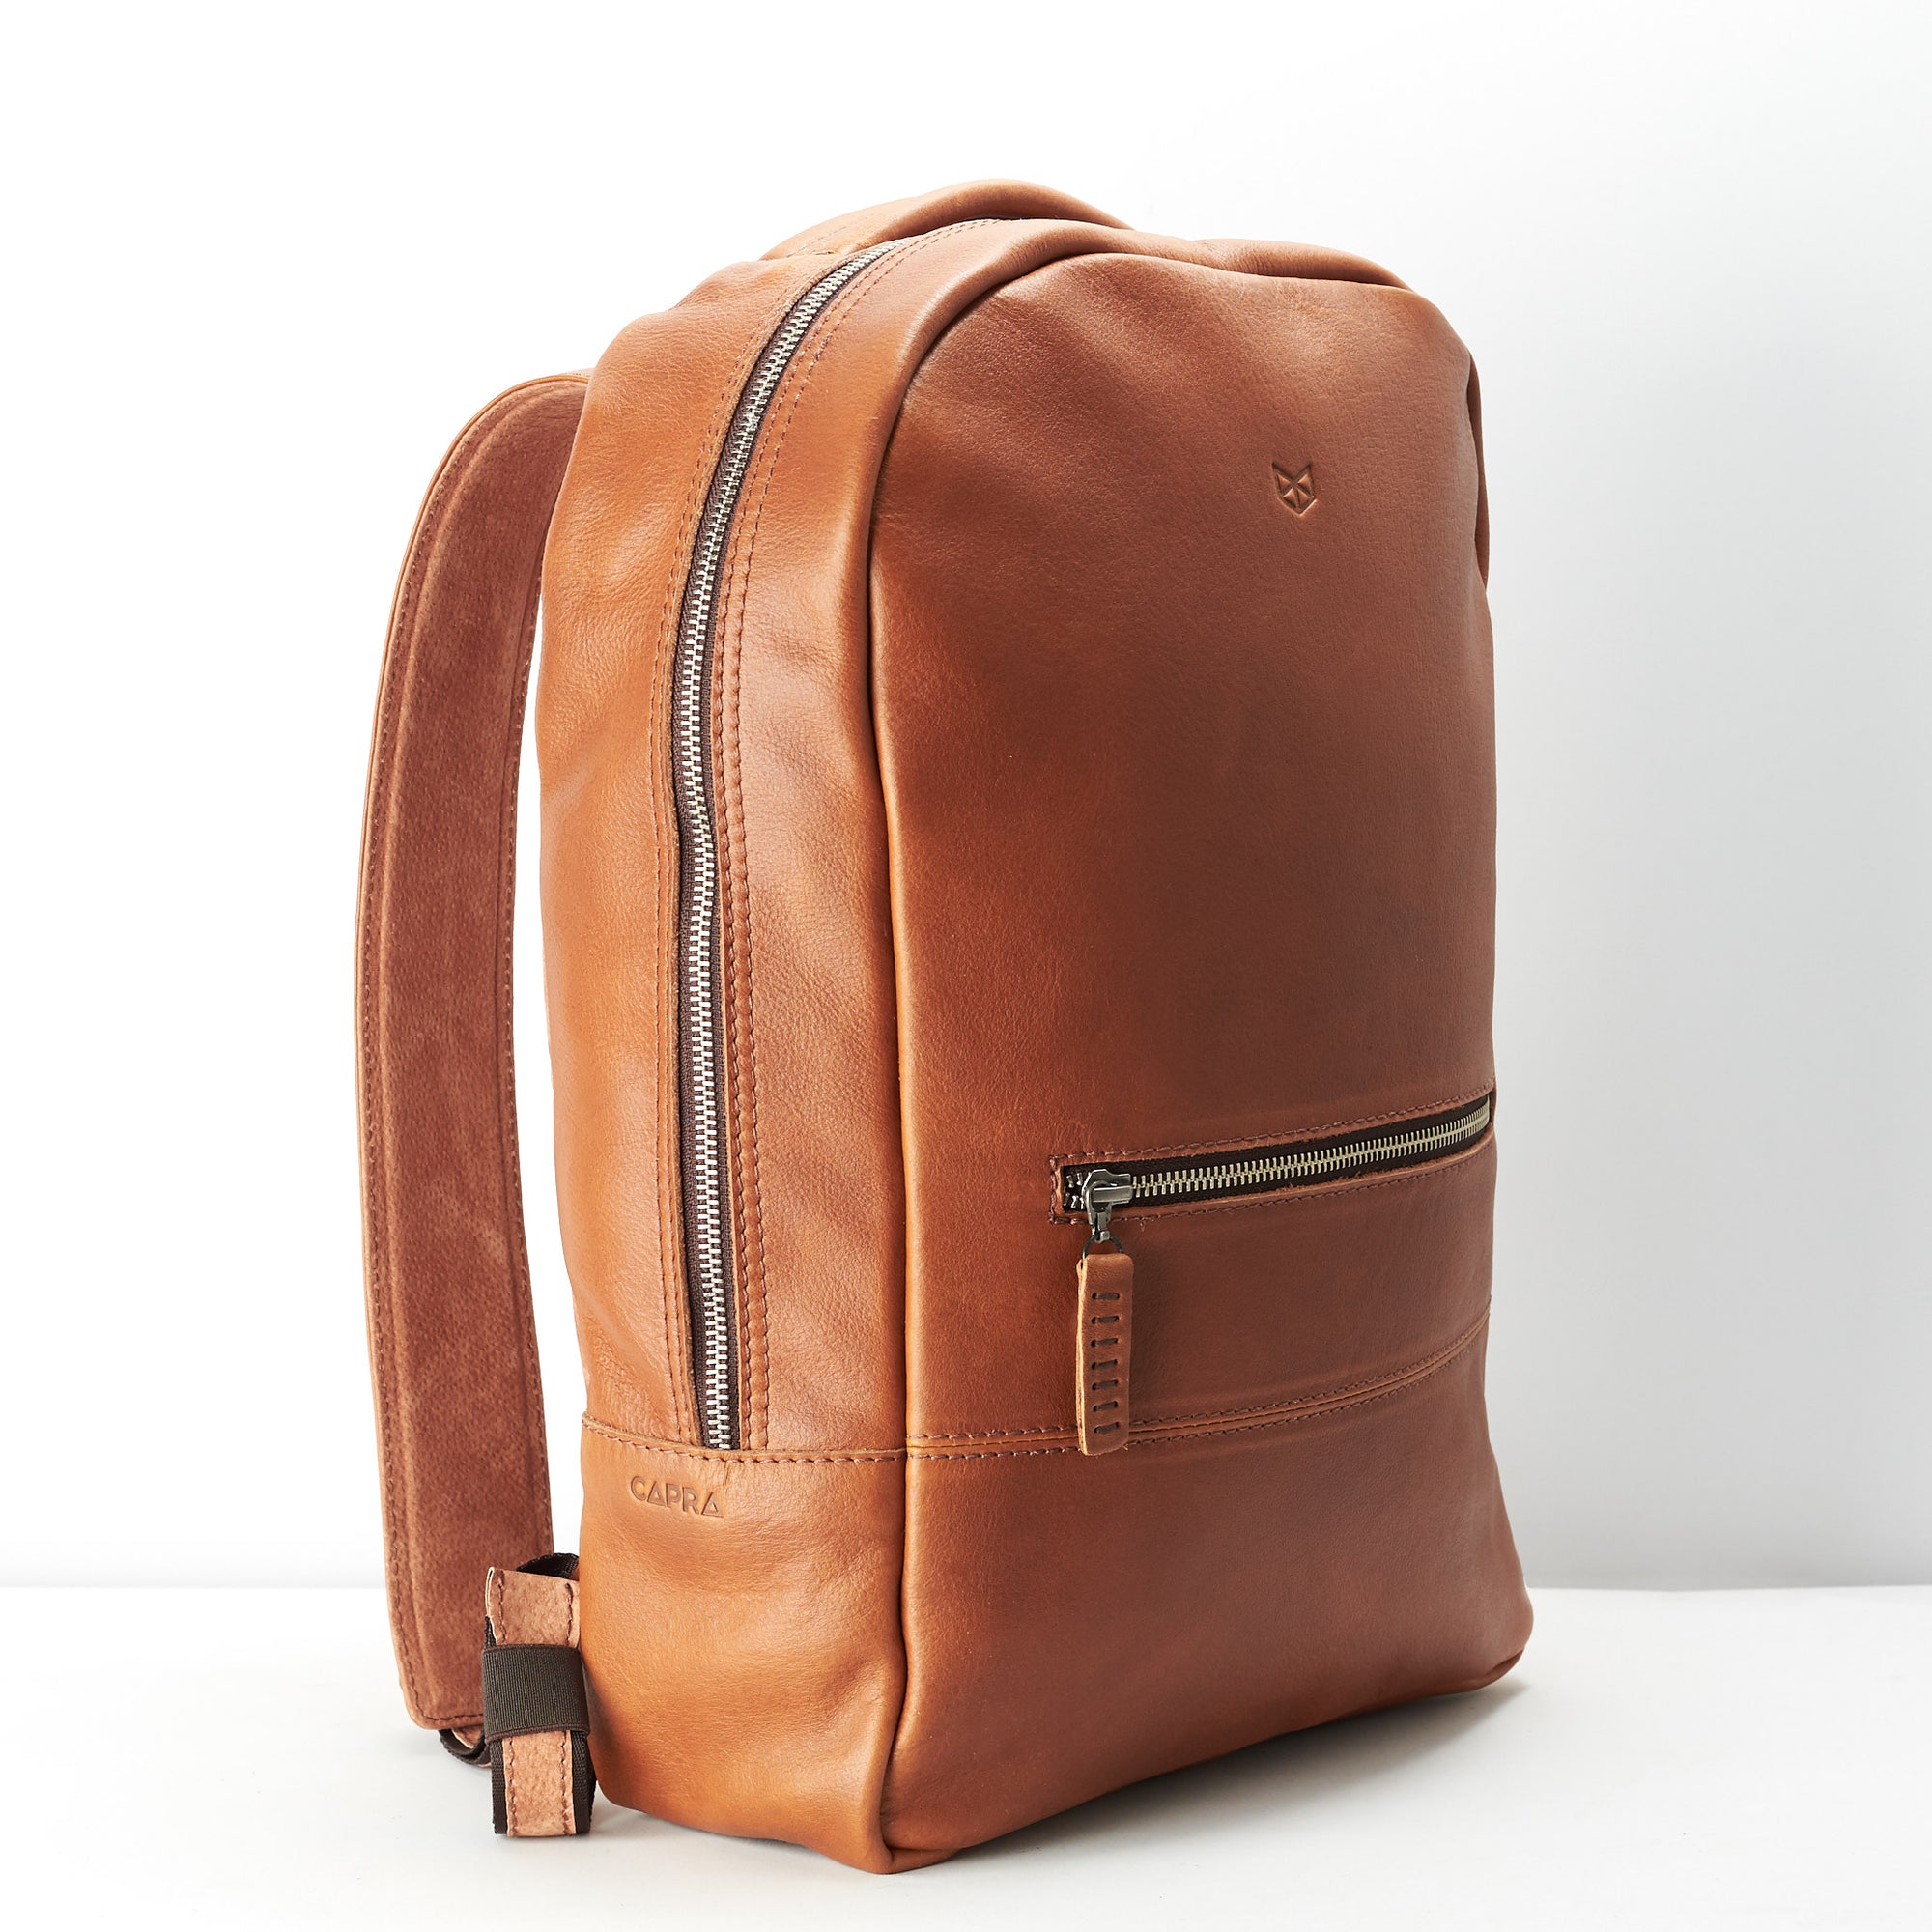 professional backpack tan by capra leather